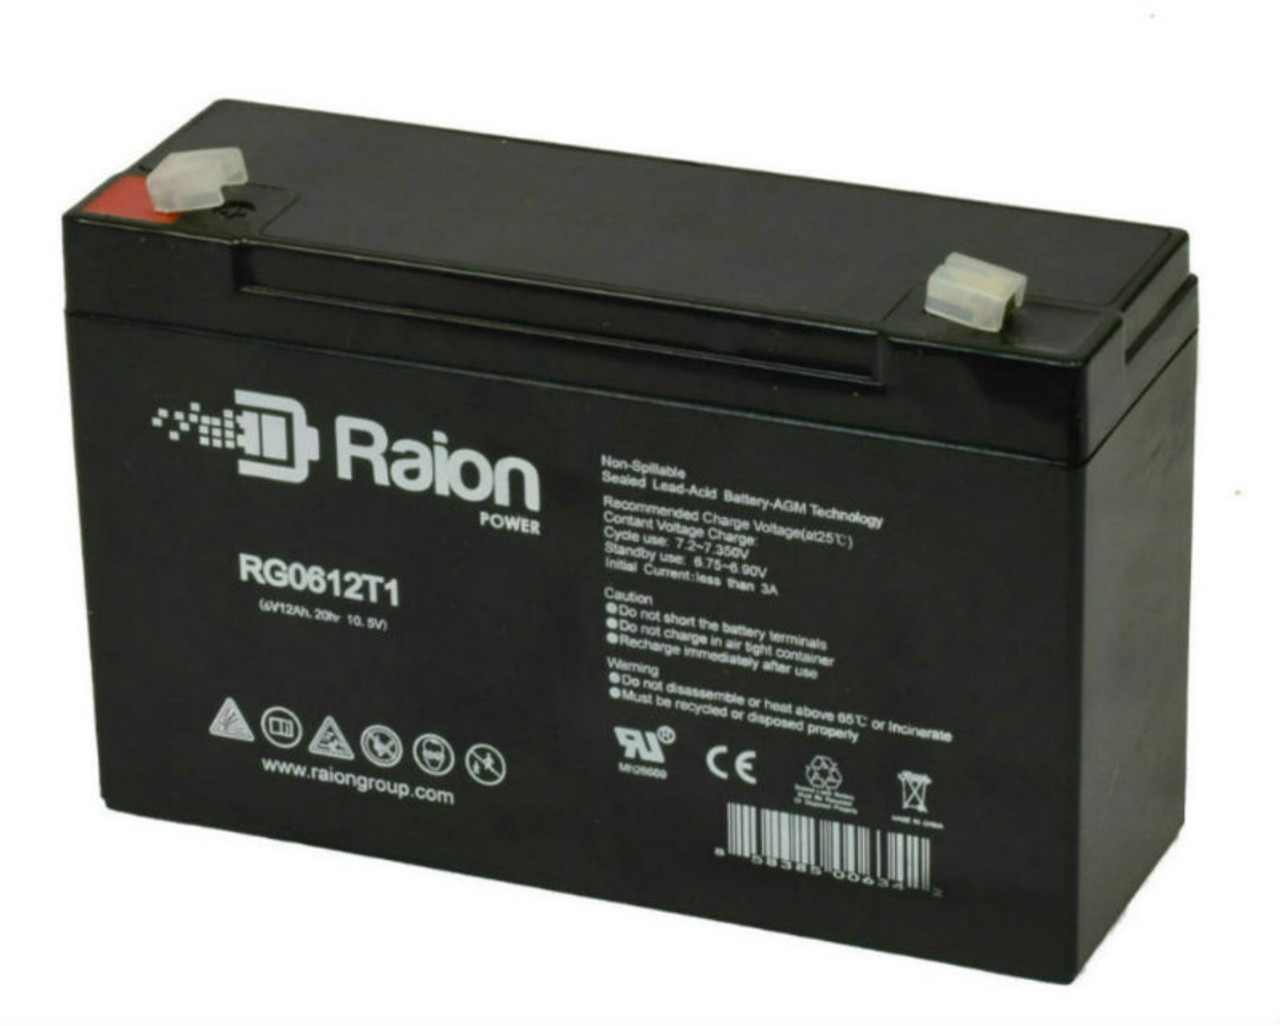 Raion Power RG06120T1 Replacement 6V 12Ah Emergency Light Battery for Chloride 1000010136